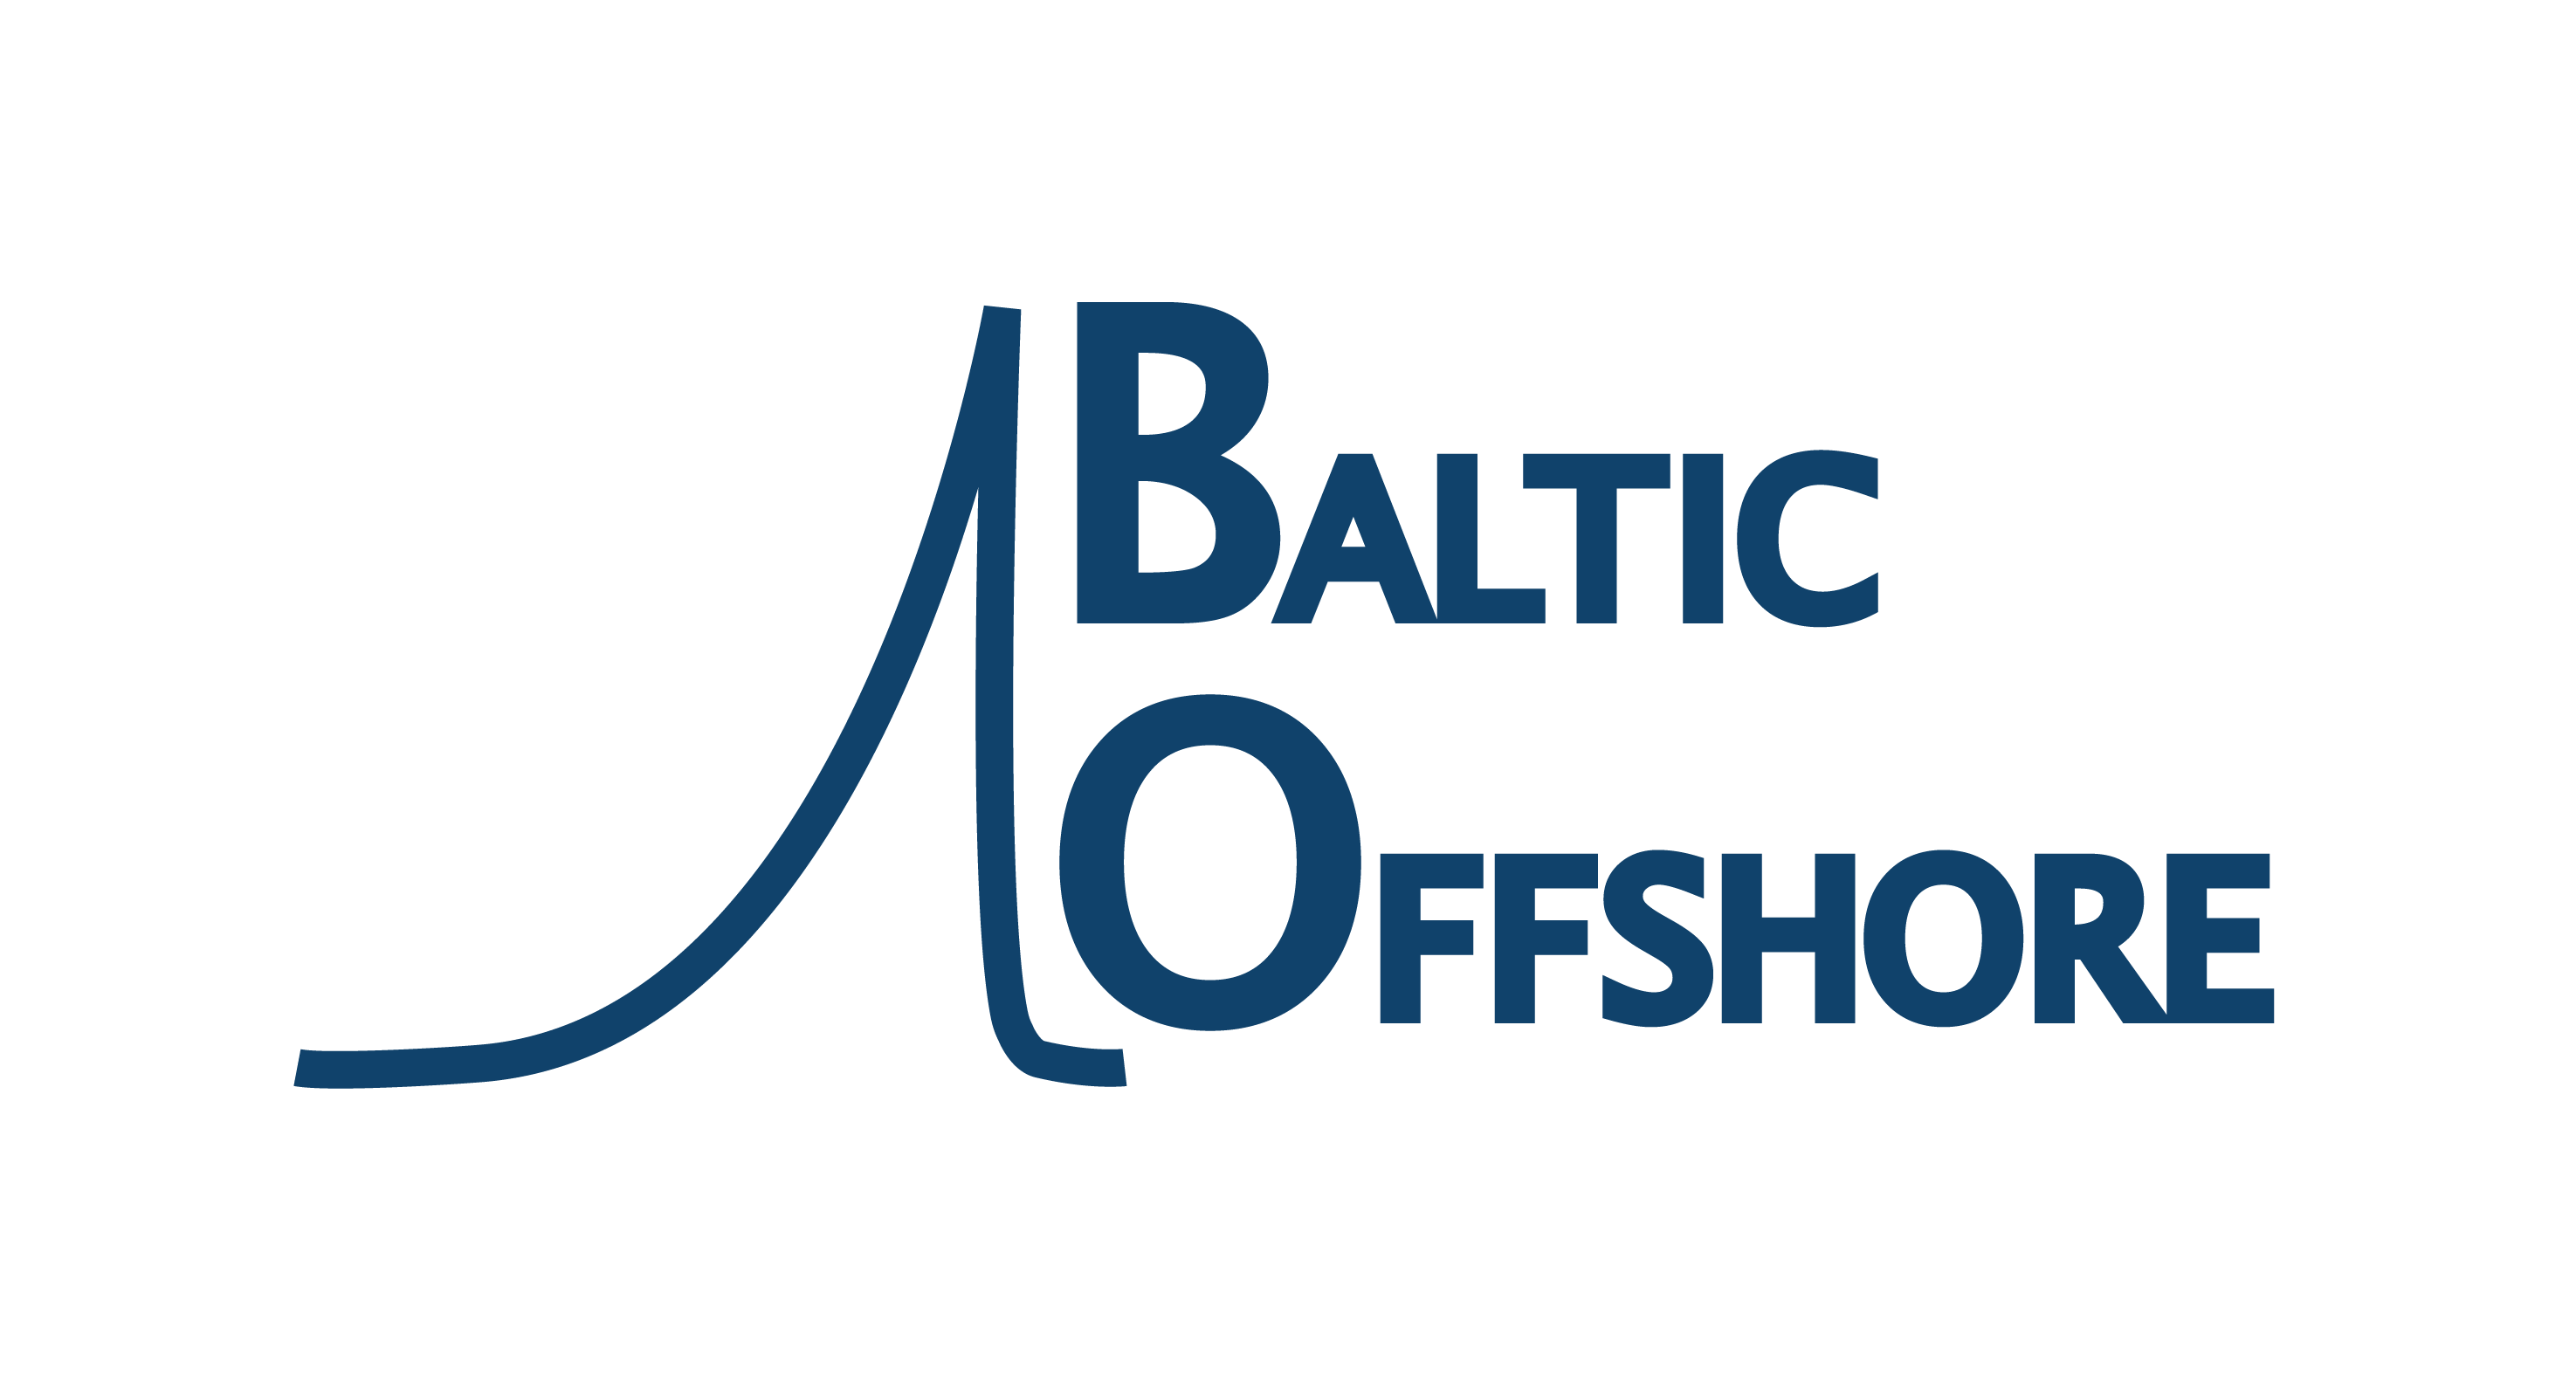 Baltic Offshore